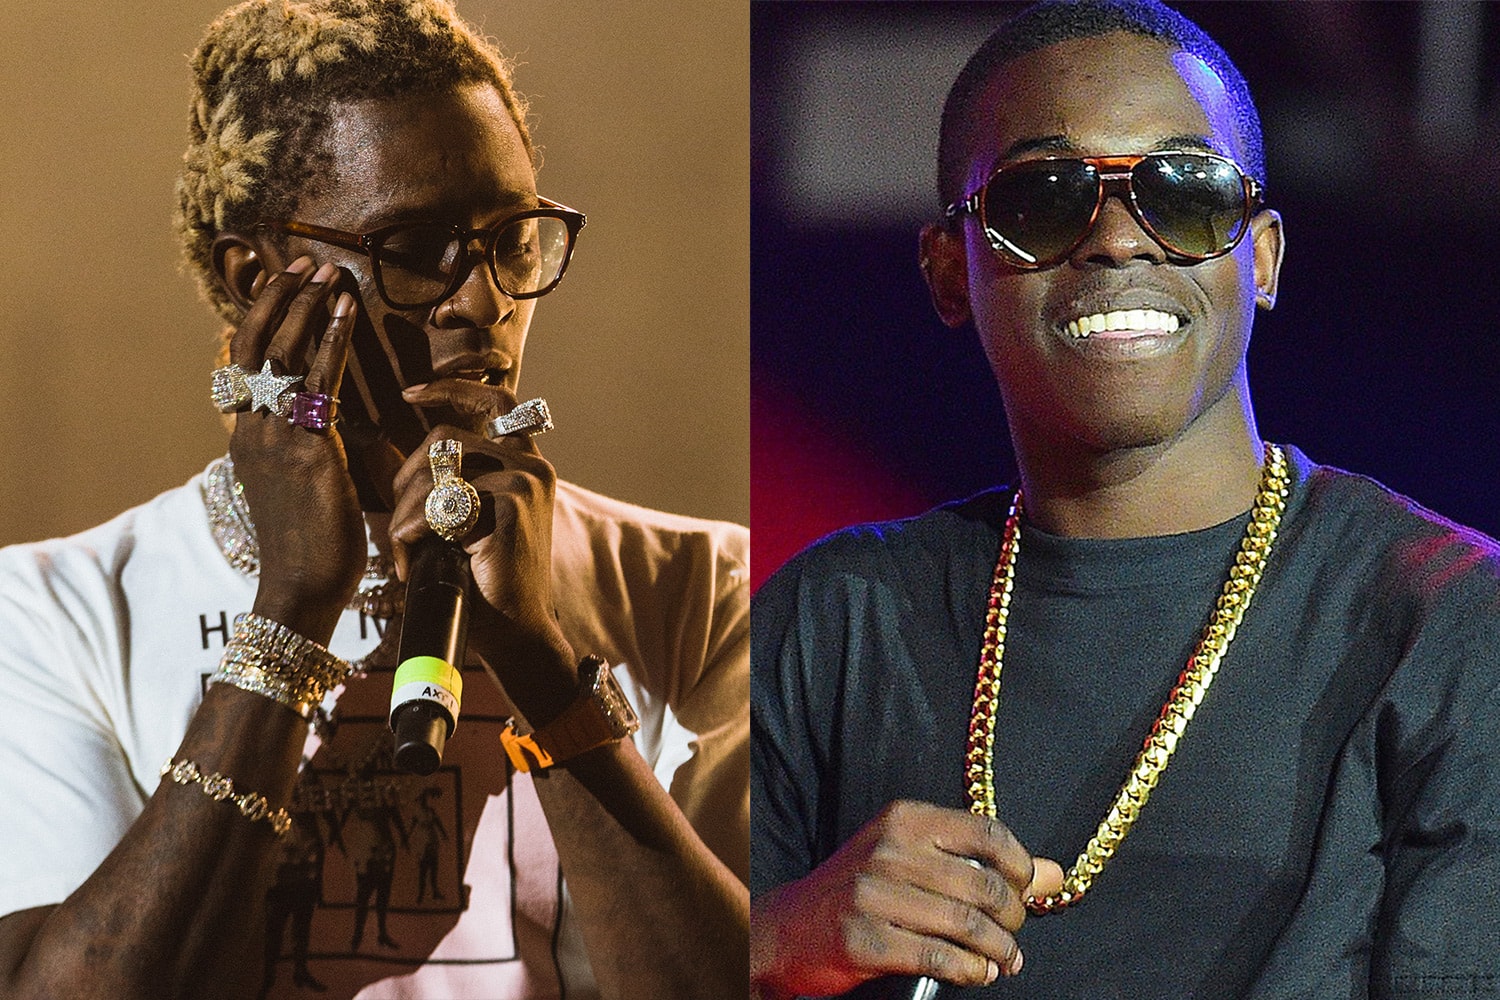 Young Thug Wants to Work With Bobby Shmurda Rowdy Rebel Upon Prison Release HYPEBEAST Music News Thugger YSL Social Media Young Stoner Life HipHop Hip Hop Rap Rapper Brooklyn New York City ATL Atlanta